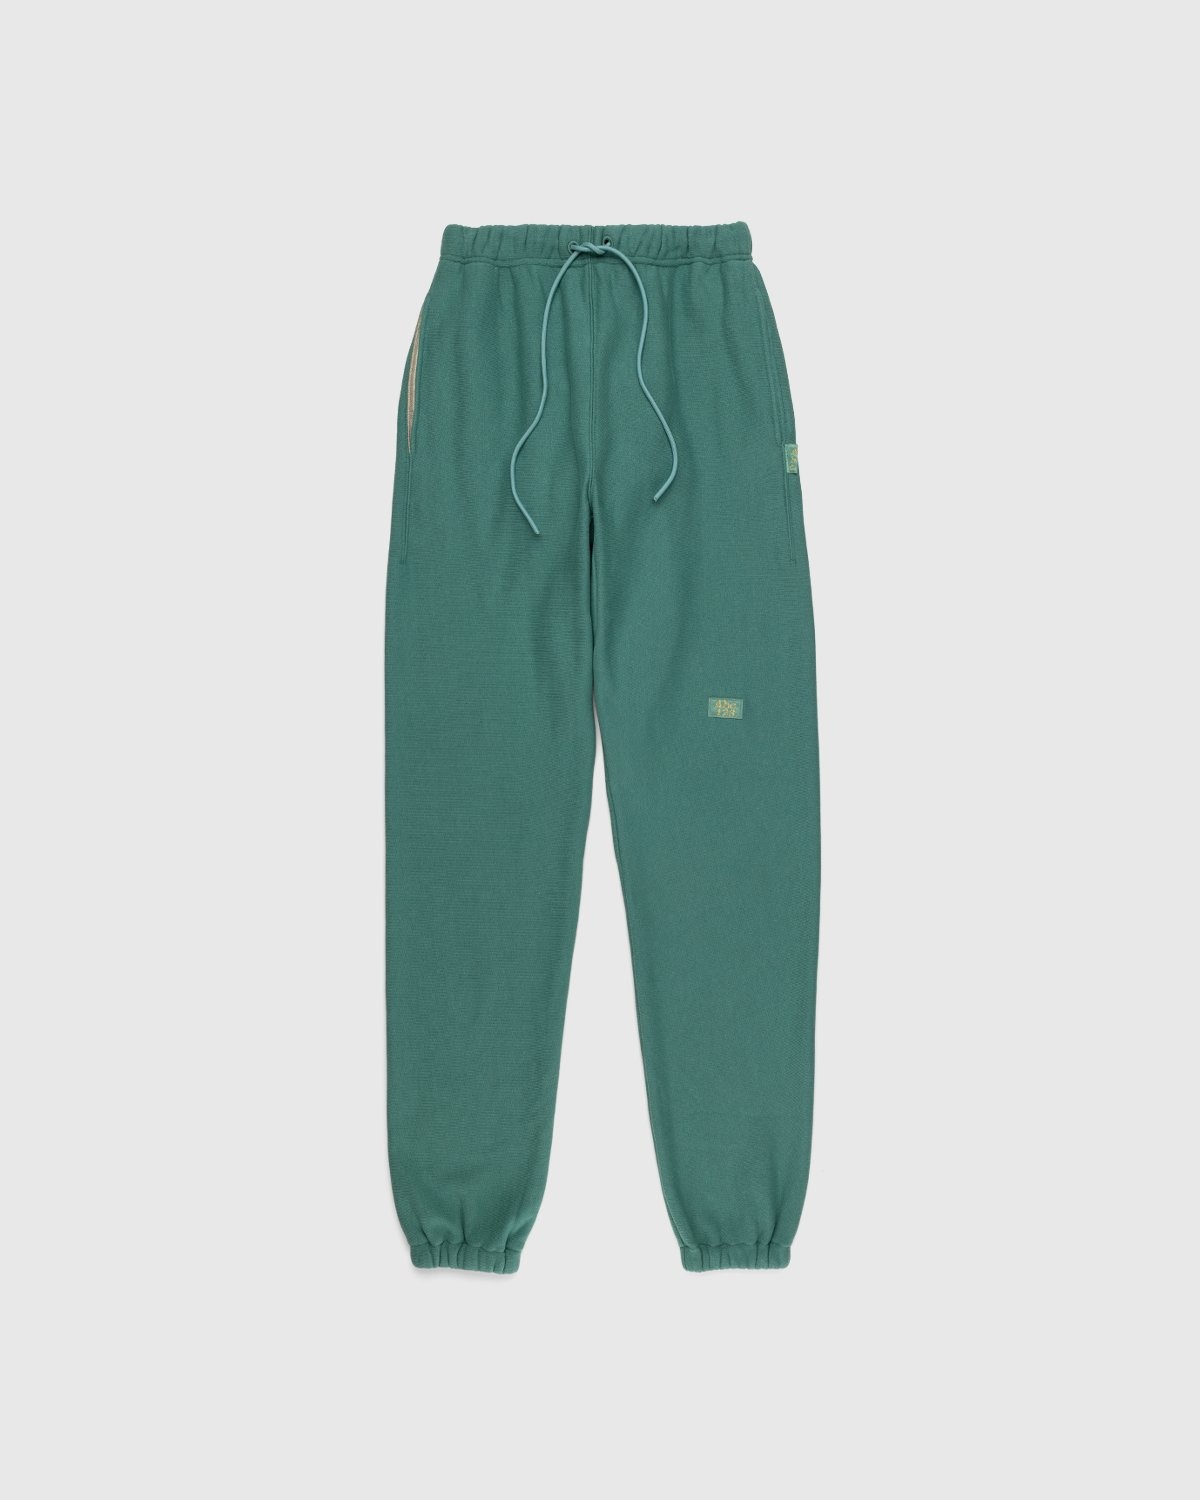 Abc. – French Terry Sweatpants Apatite - Pants - Green - Image 1